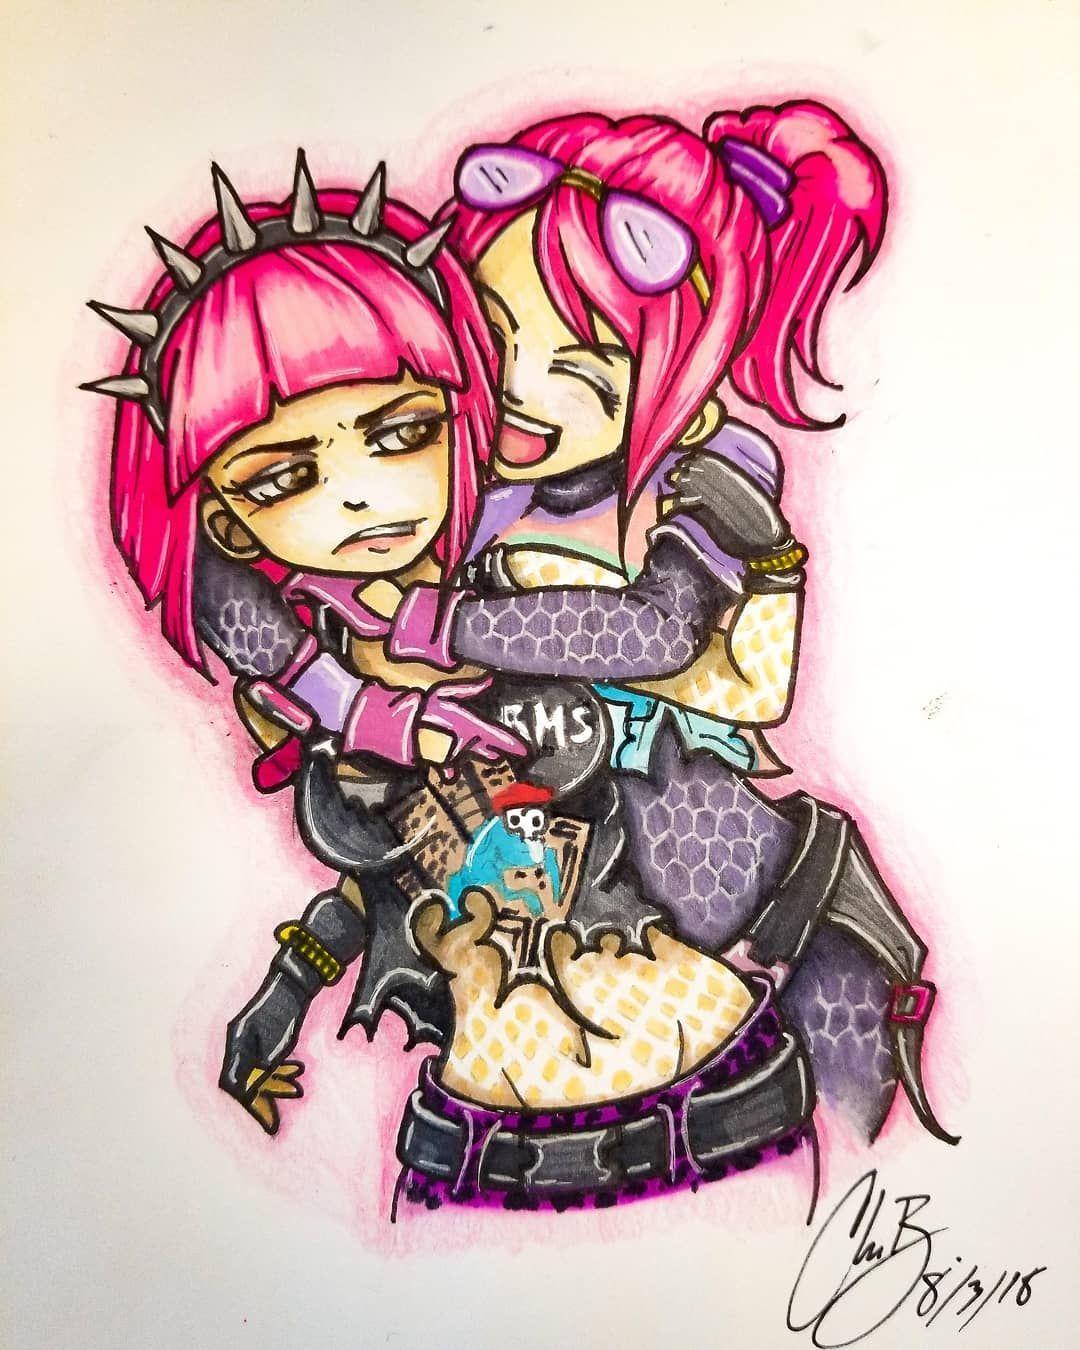 Drew up power chord and brite bomber from fortnite #tattoos